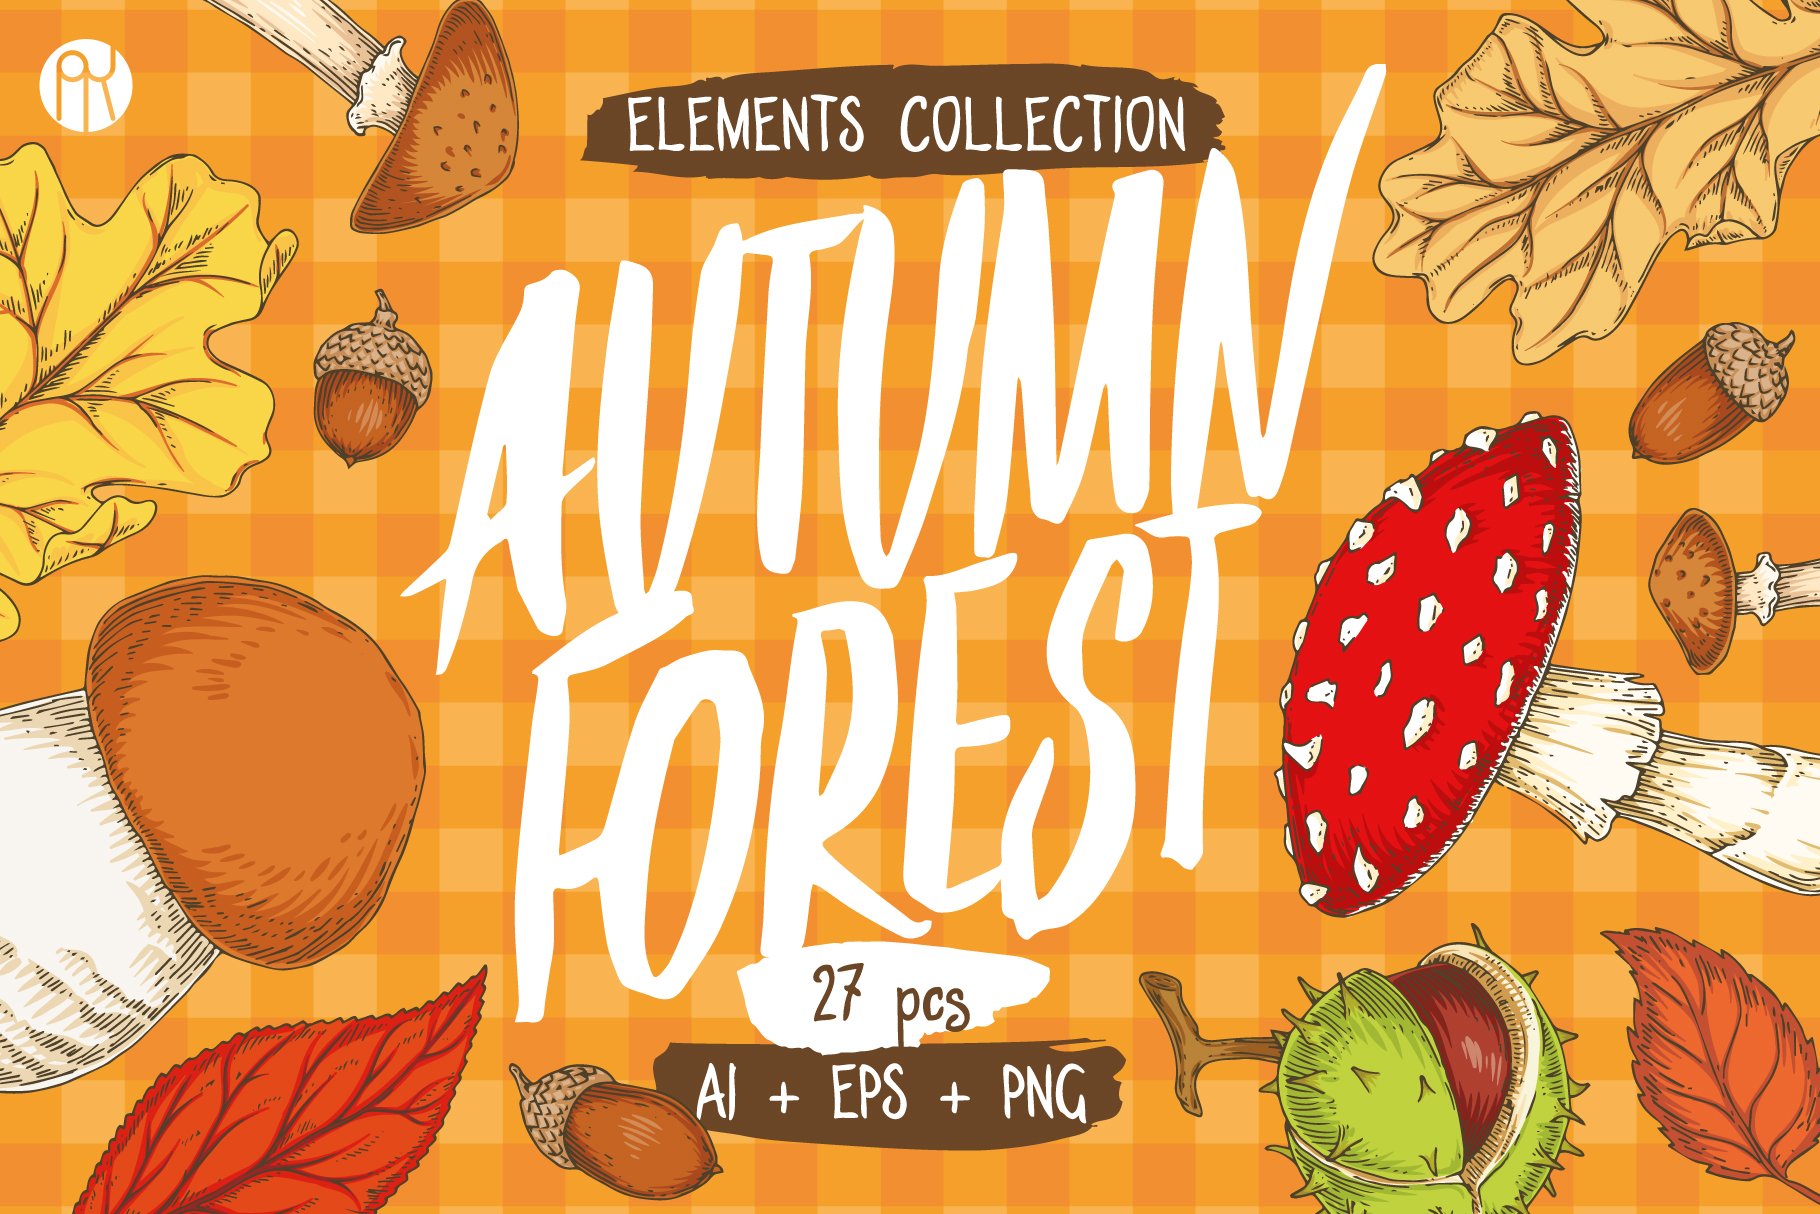 Autumn Forest Elements Collection cover image.